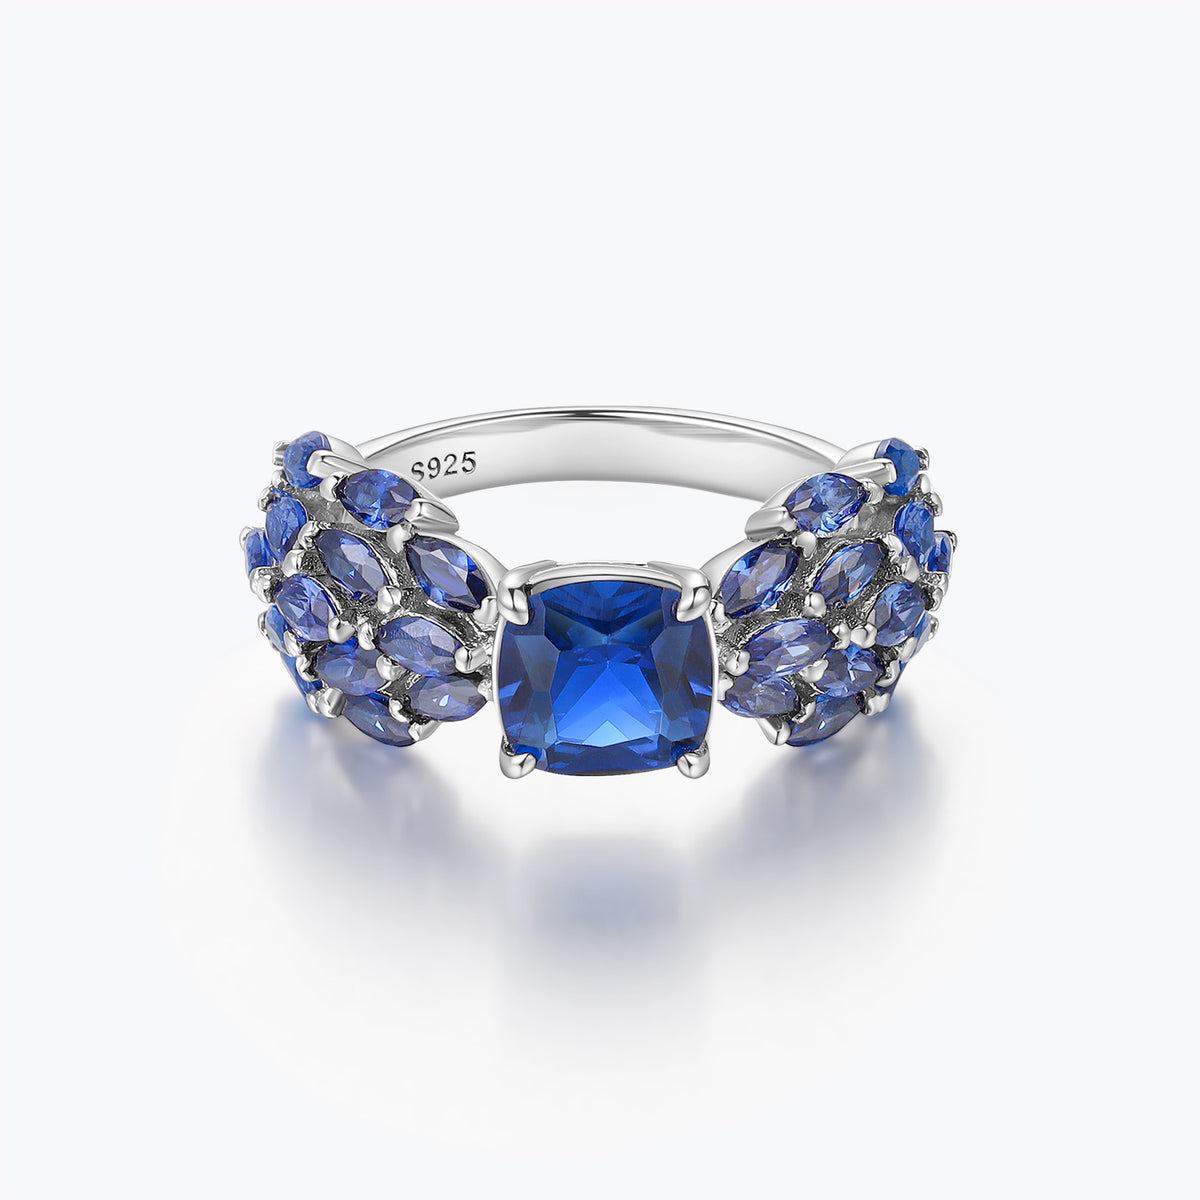 Dissoo® Sapphire Blue Cushion Cut Cluster Engagement Ring&Cocktail Ring